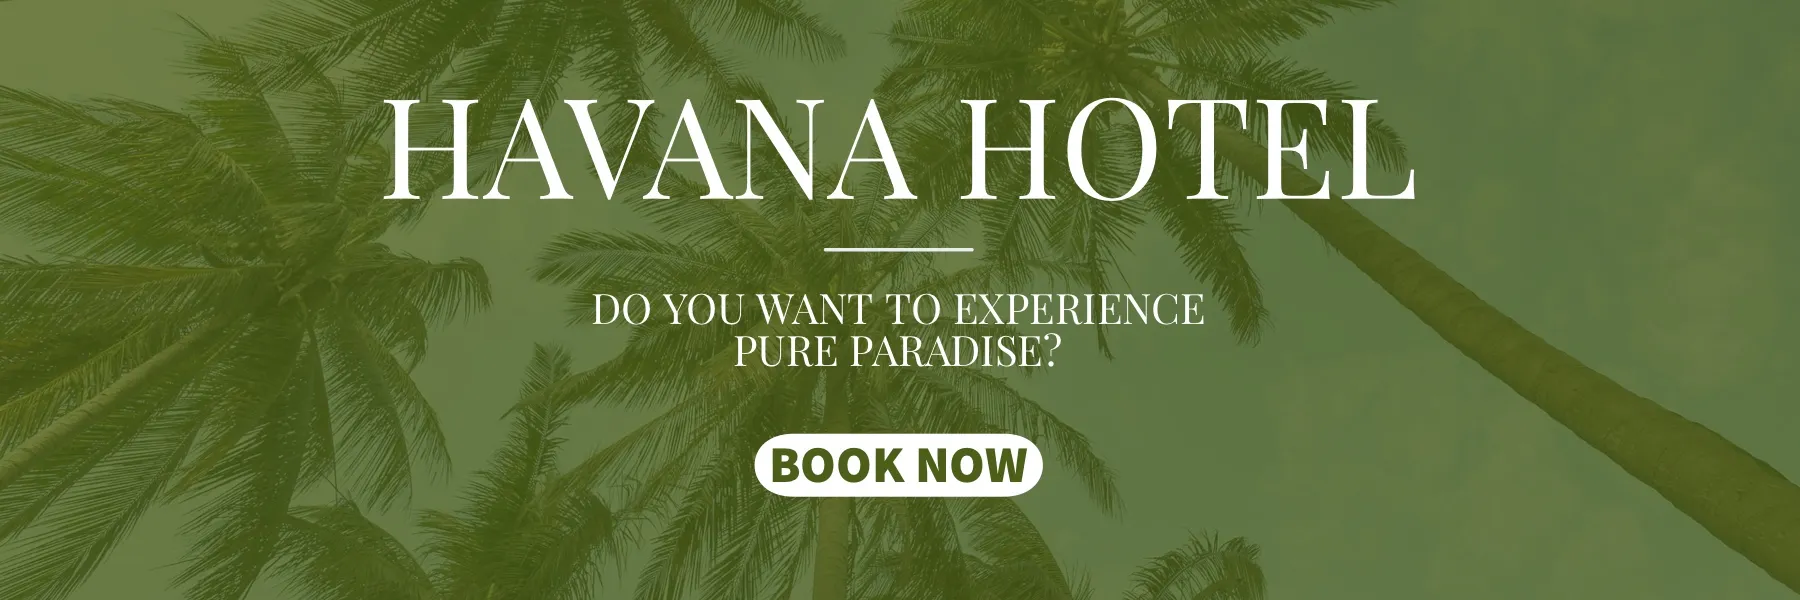 Green and White Havana Hotel Ad Facebook Banner 